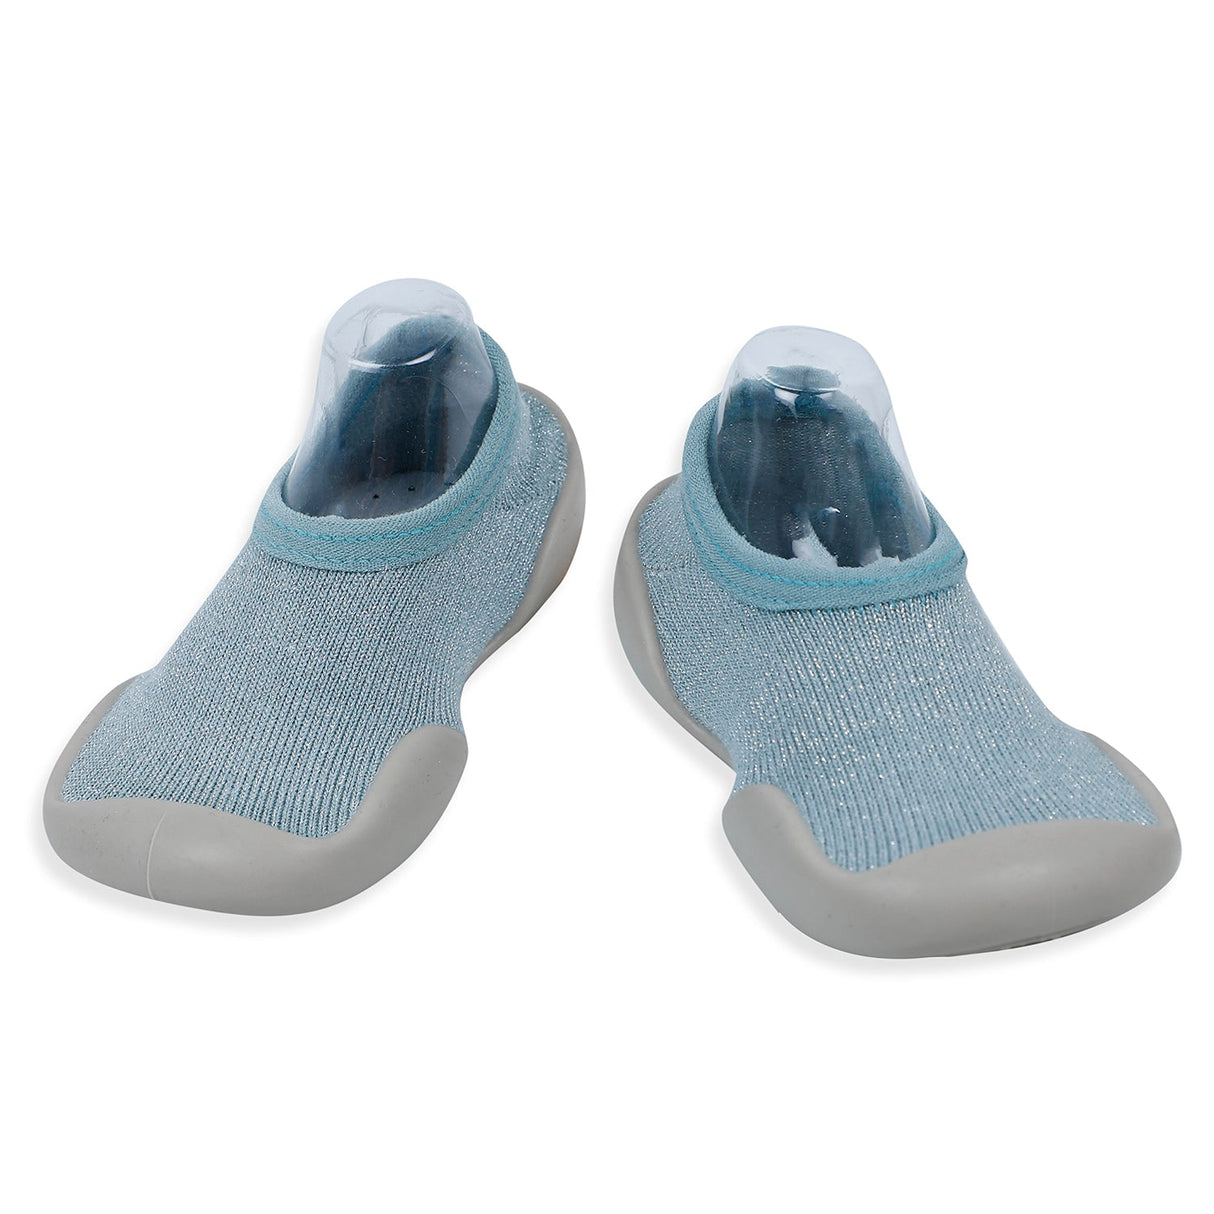 Anti-Skid Slip-On Rubber Sole Comfy Socks Booties